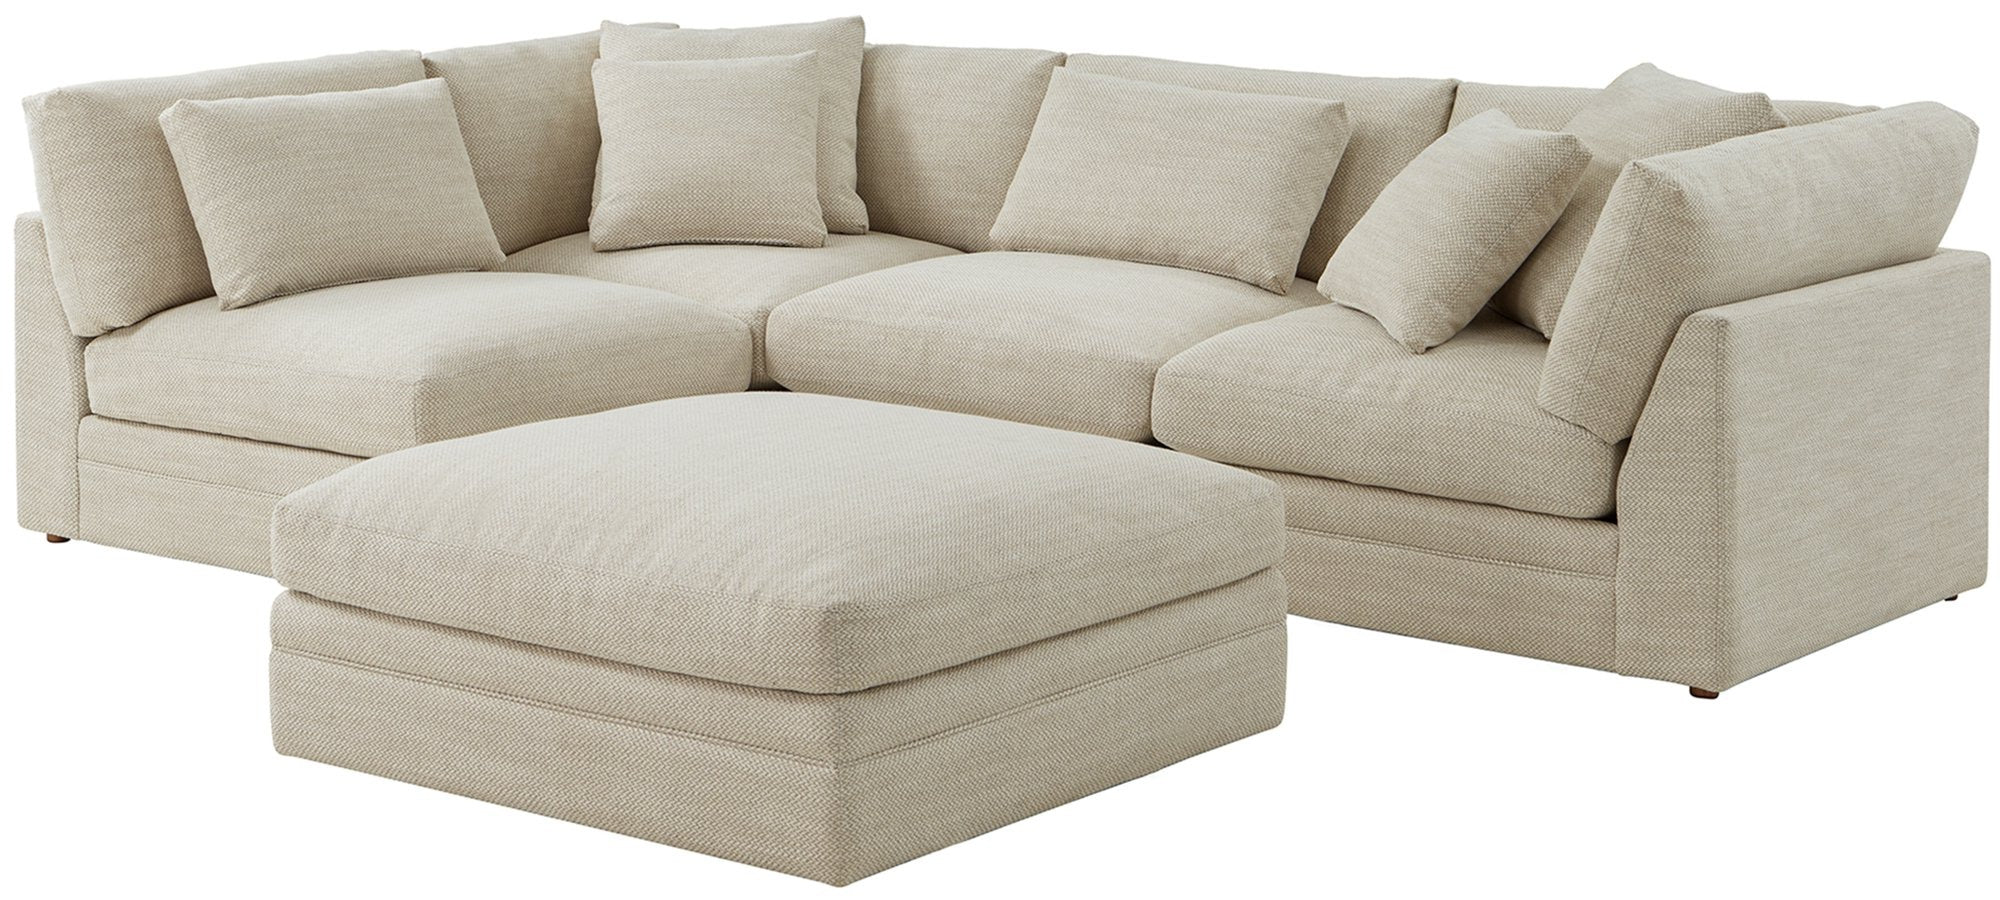 Feel Good Sectional with Ottoman, Left, Oyster - Image 9